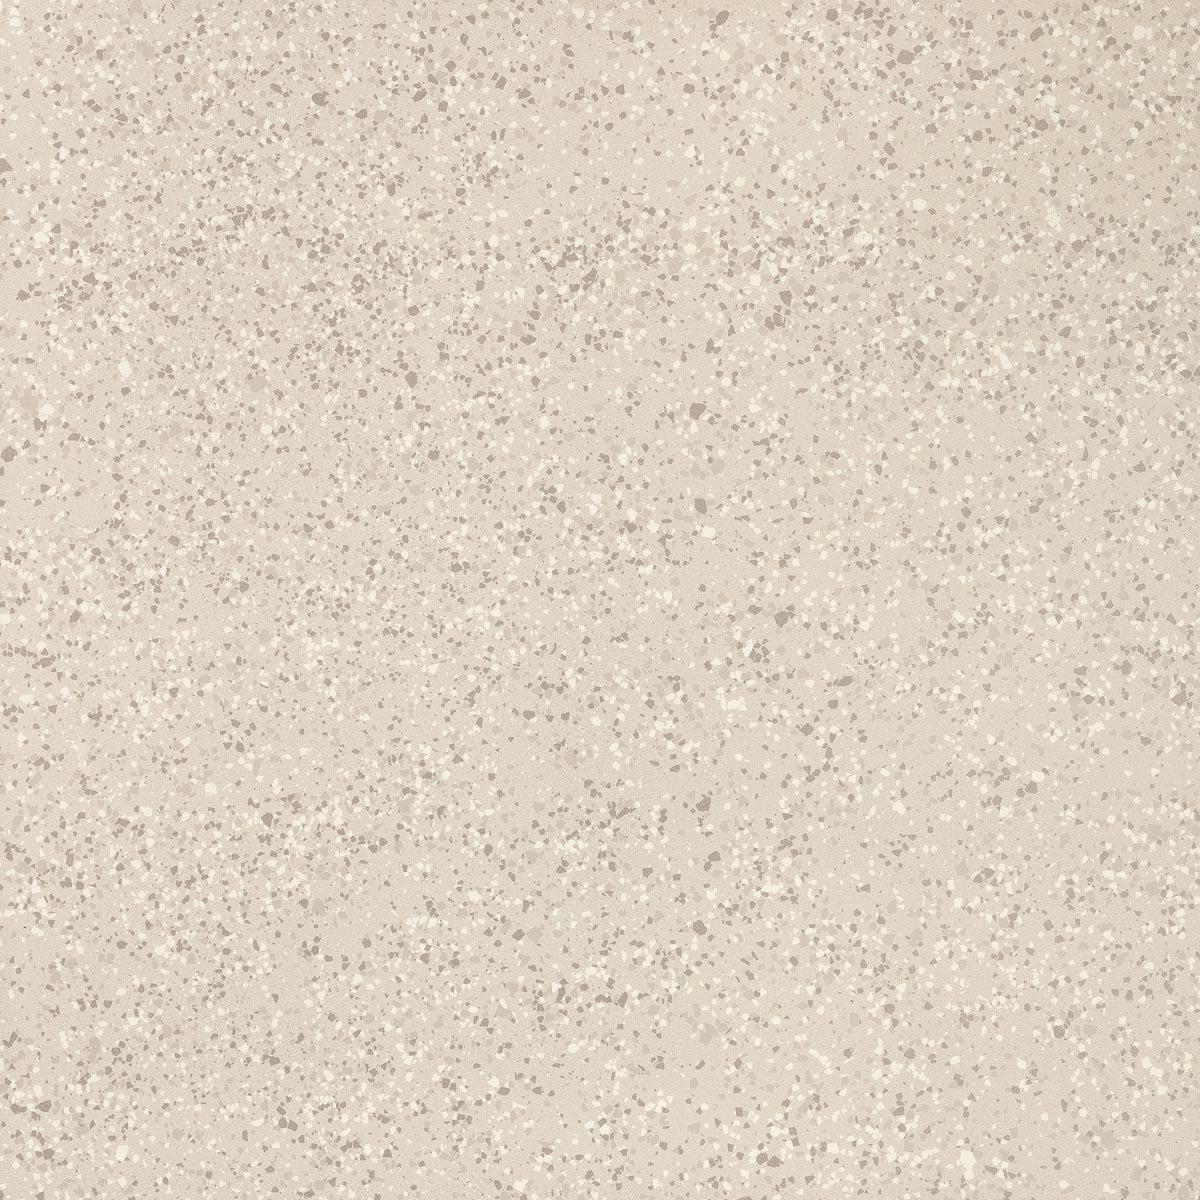 Imola Parade Bianco Natural Flat Matt Outdoor 166102 120x120cm rectified 10,5mm - PRDE RB120W RM